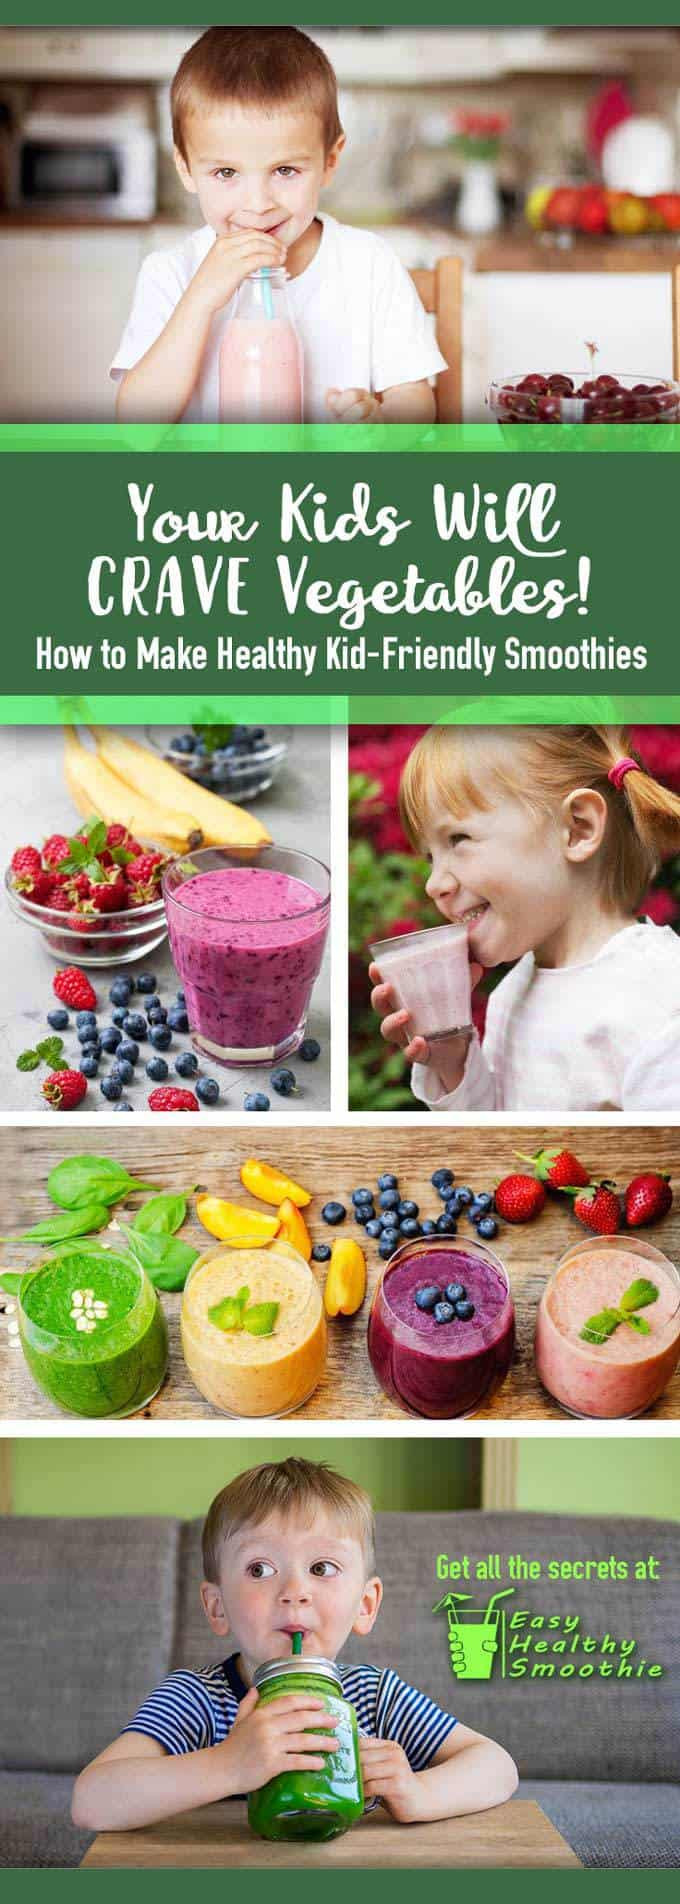 Kid Friendly Smoothies
 How to Make Ve able Smoothies Your Kids Will Love